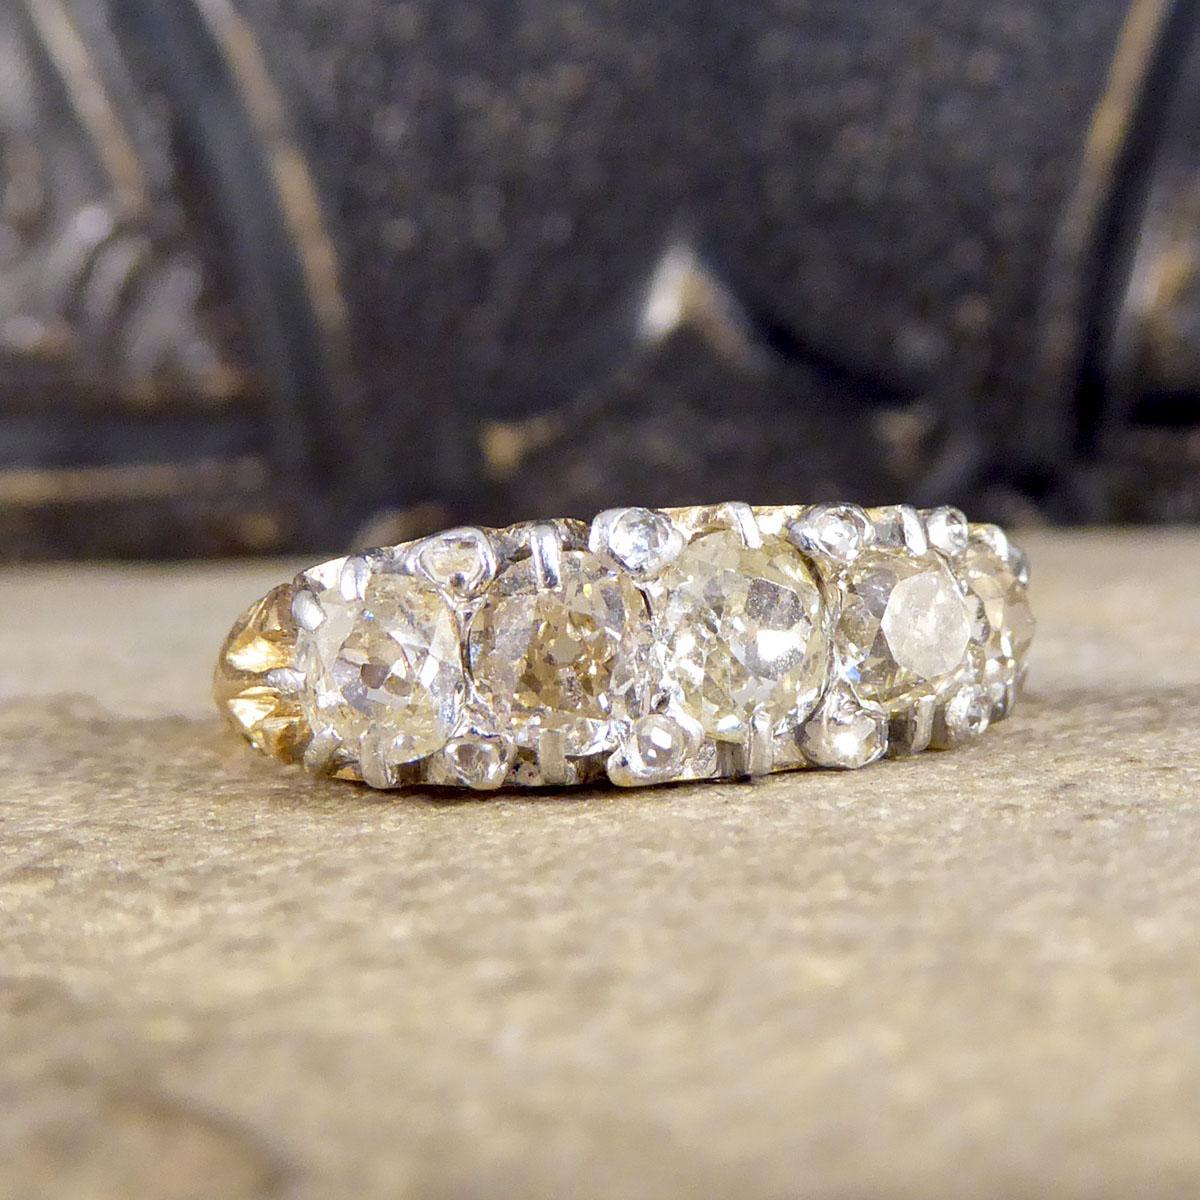 This classic antique five stone ring has been hand crafted in the Late Victorian era in 18ct Yellow Gold with a thick gallery leading to a finer band. The gallery on this ring is astonishing and highlights the quality of the craftsmanship in this